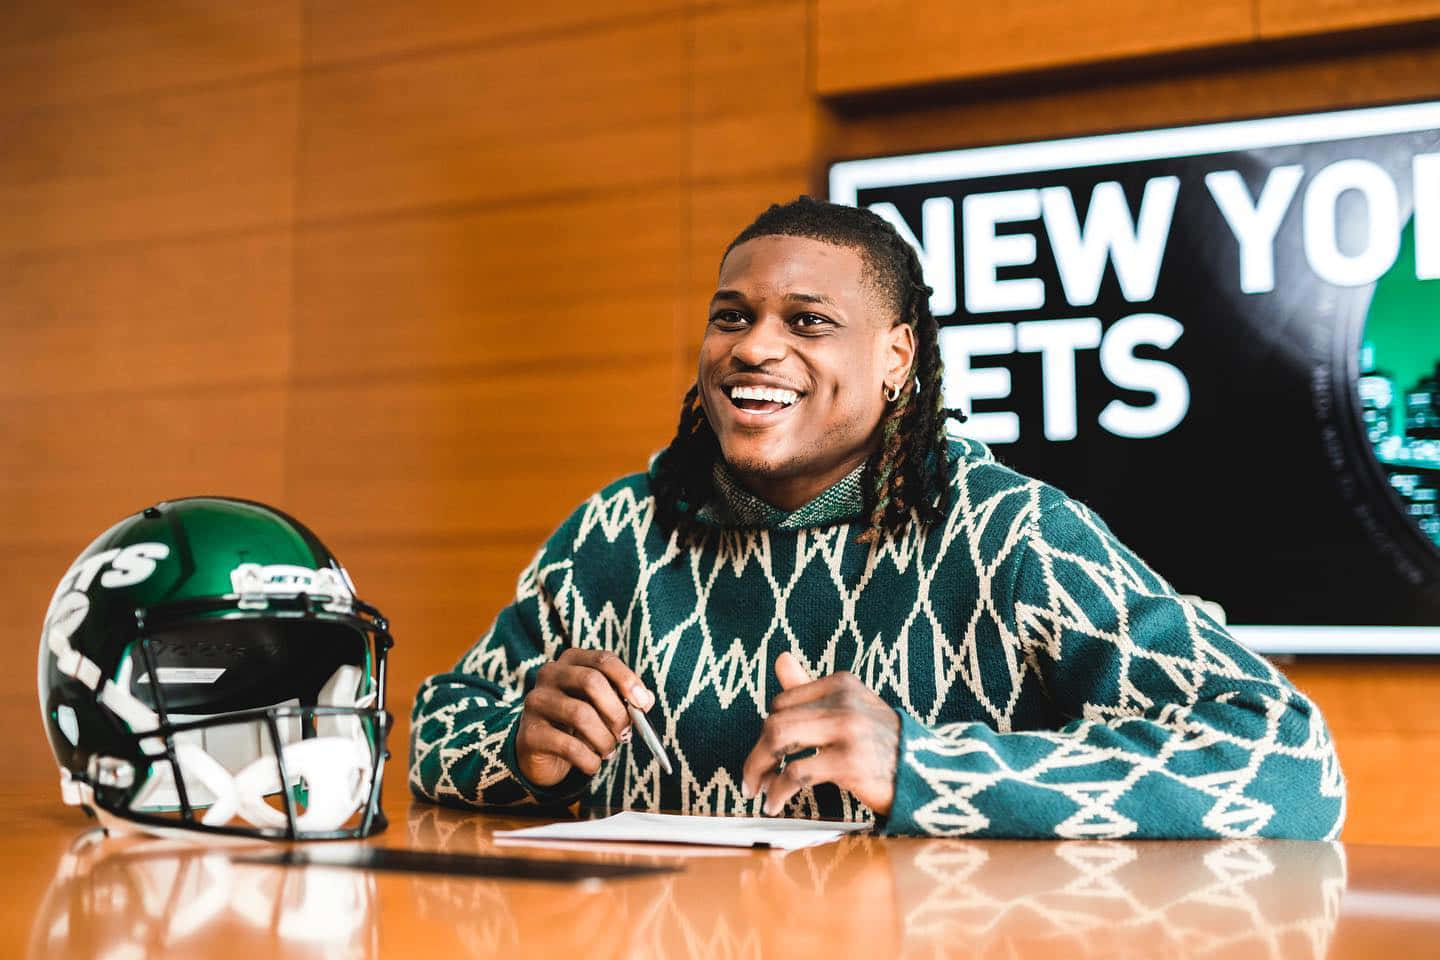 Smiling Football Player New York Jets Signing Wallpaper